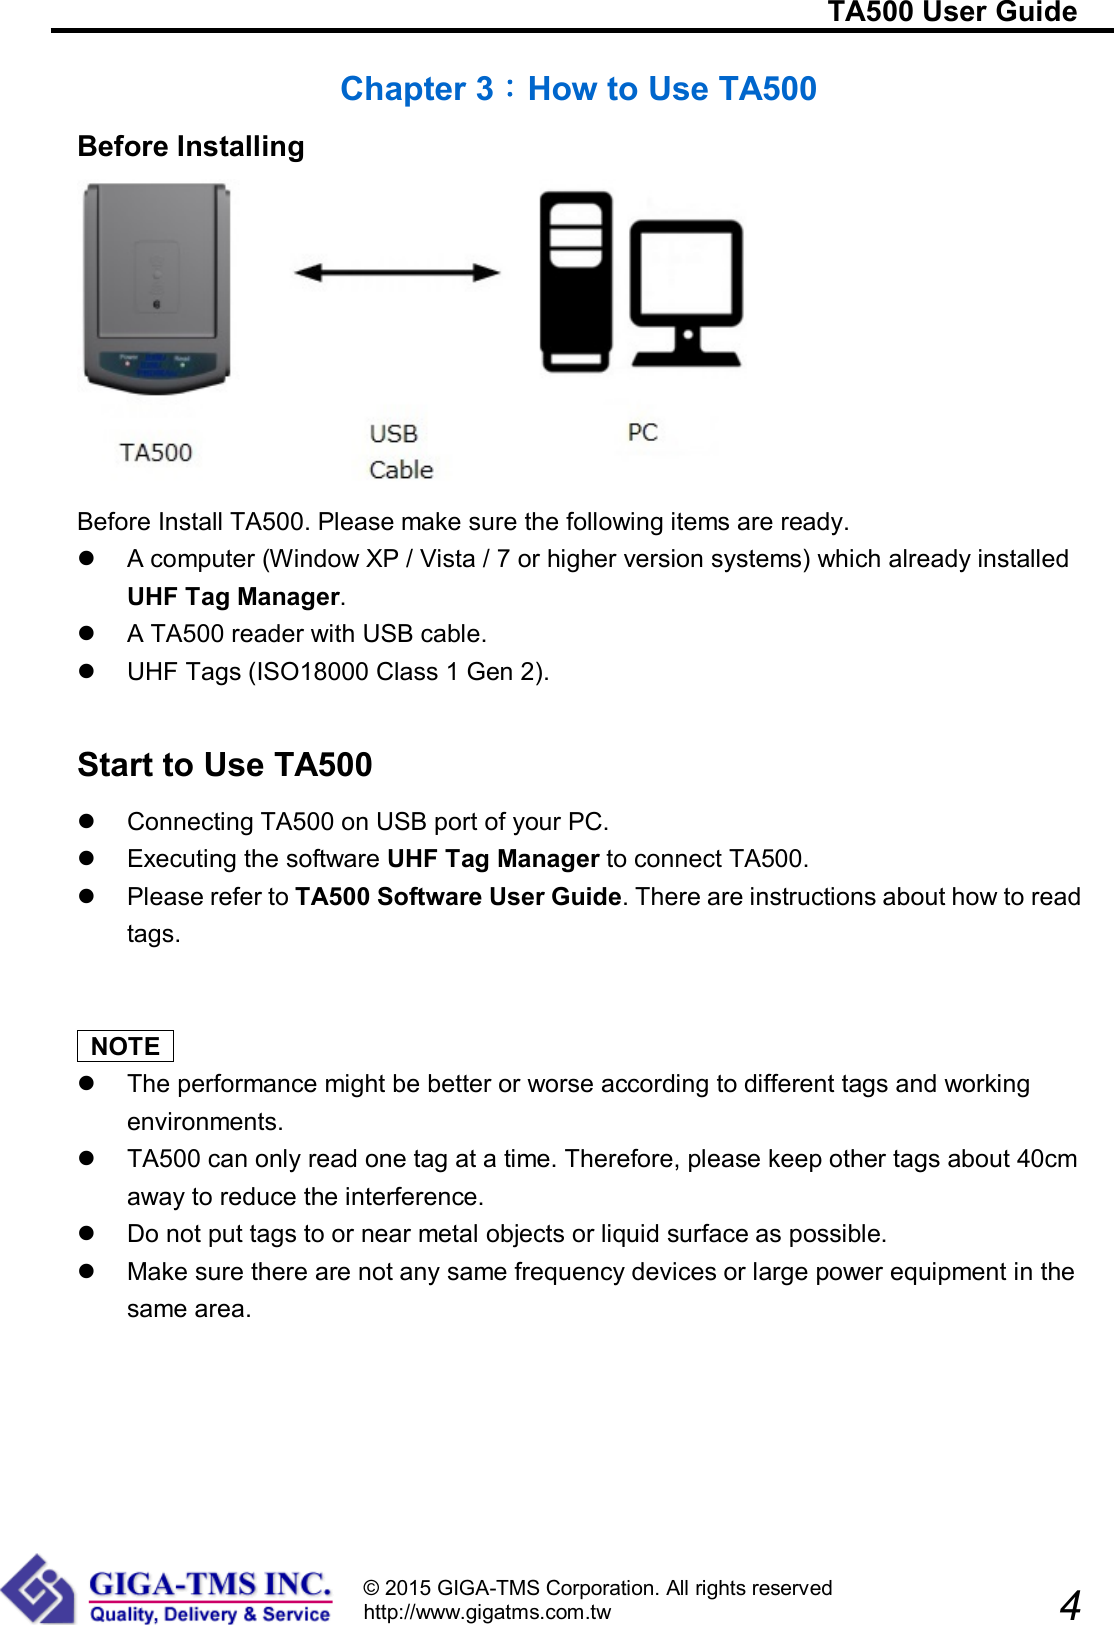                                                                         TA500 User Guide                            4 © 2015 GIGA-TMS Corporation. All rights reserved http://www.gigatms.com.tw  Chapter 3：How to Use TA500 Before Installing  Before Install TA500. Please make sure the following items are ready.   A computer (Window XP / Vista / 7 or higher version systems) which already installed UHF Tag Manager.   A TA500 reader with USB cable.   UHF Tags (ISO18000 Class 1 Gen 2).   Start to Use TA500   Connecting TA500 on USB port of your PC.   Executing the software UHF Tag Manager to connect TA500.   Please refer to TA500 Software User Guide. There are instructions about how to read tags.     NOTE     The performance might be better or worse according to different tags and working environments.   TA500 can only read one tag at a time. Therefore, please keep other tags about 40cm away to reduce the interference.   Do not put tags to or near metal objects or liquid surface as possible.   Make sure there are not any same frequency devices or large power equipment in the same area. 